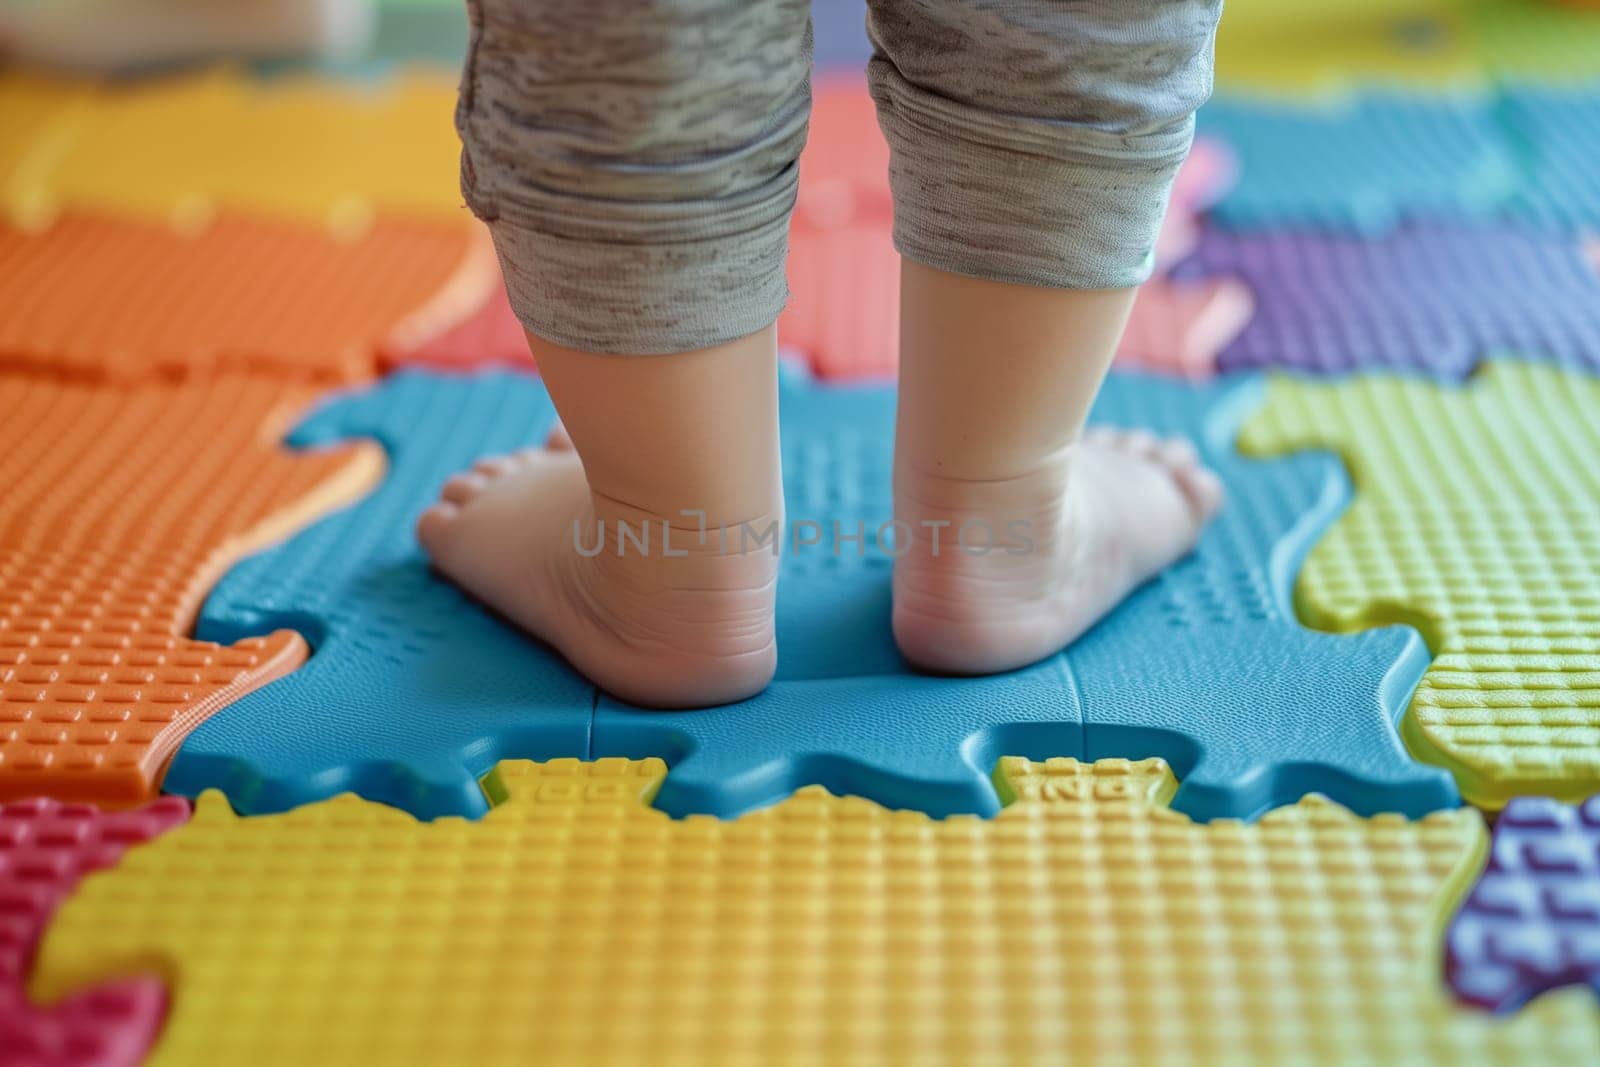 Childs Feet on Colorful Puzzle Mat by Sd28DimoN_1976